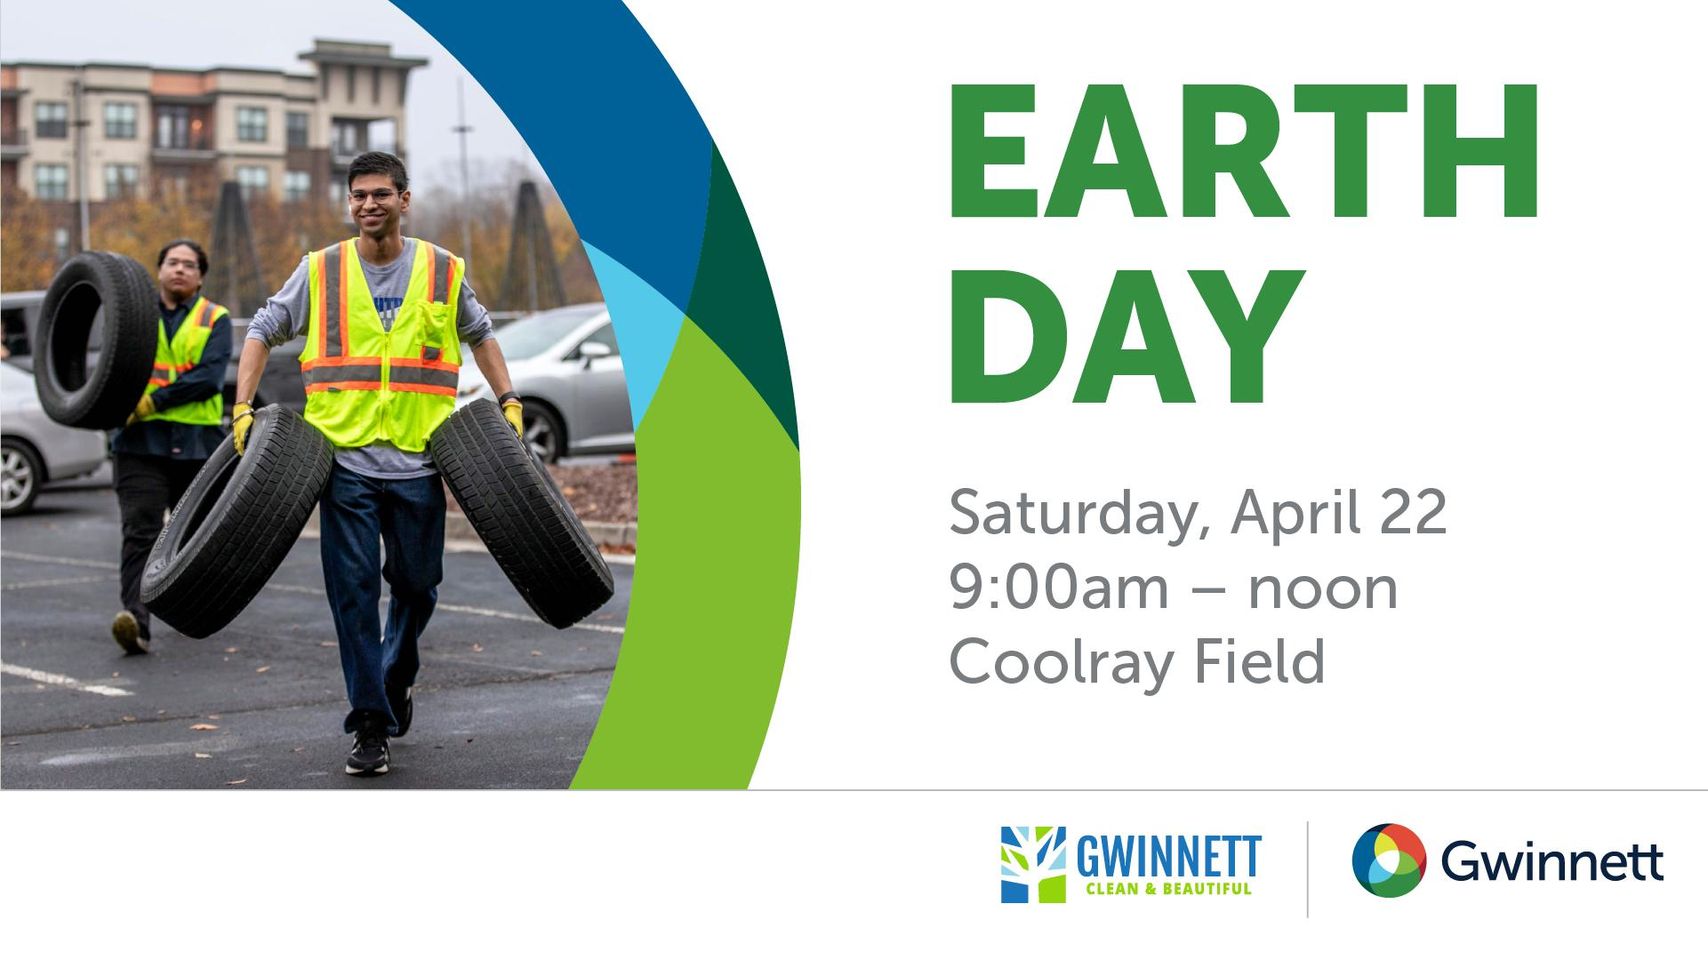 Earth Day Recycling Collection Event